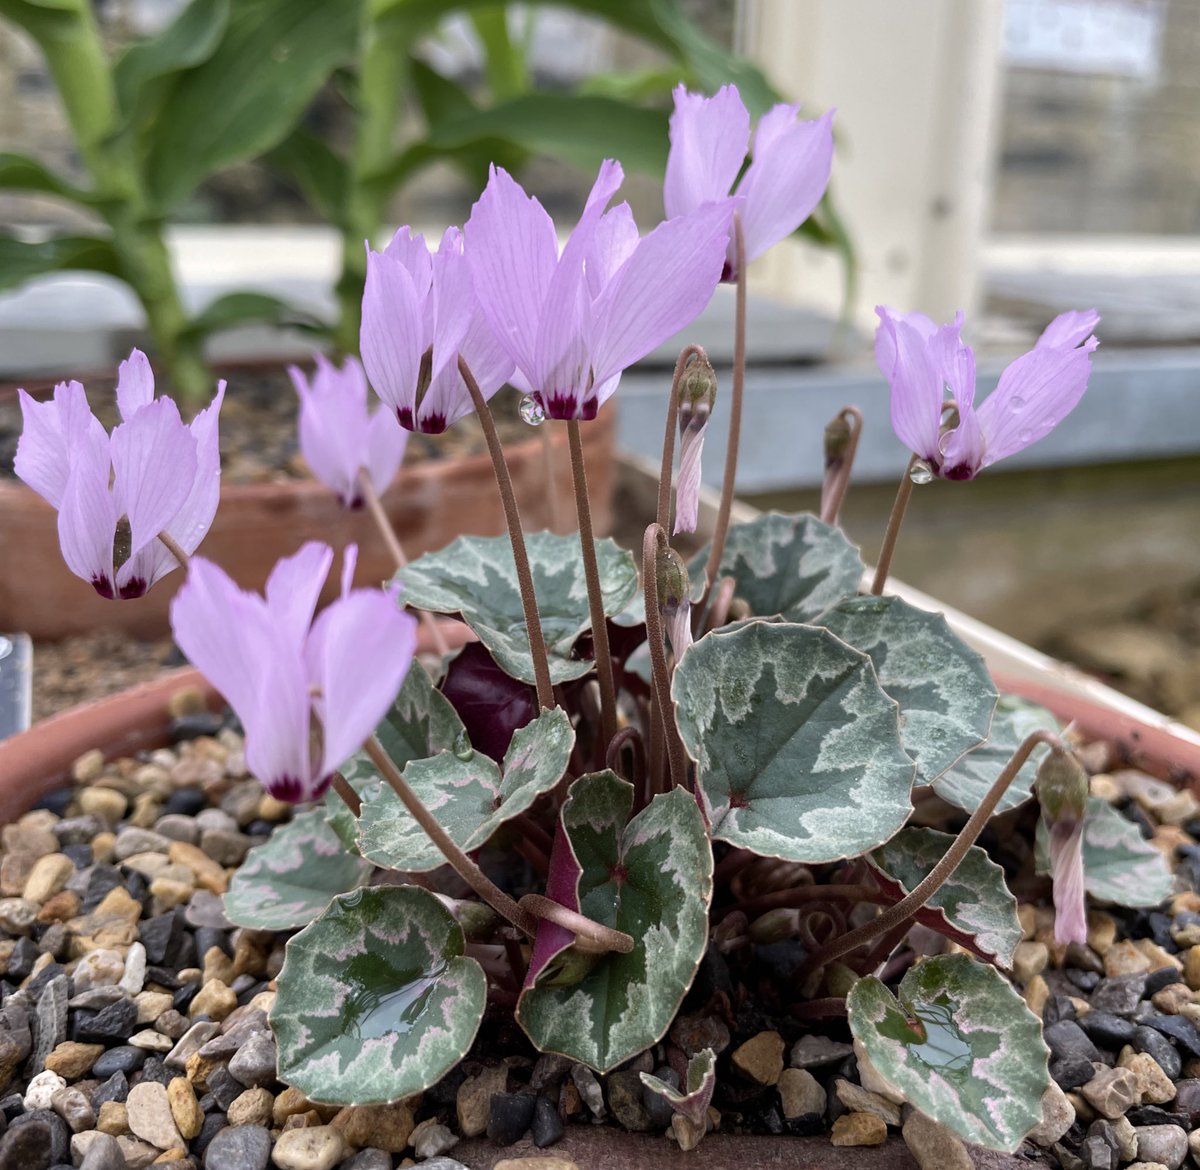 Cyclamen mirabile looking wonderful with its ethereal pink flowers in the alpine house @rhsharlowcarr. We welcome the new alpine apprentice @bertrudewinthrop to Harlow Carr this week sponsored by the @alpinegardensoc they will be with us for 6 months then head to @rbgedinburgh